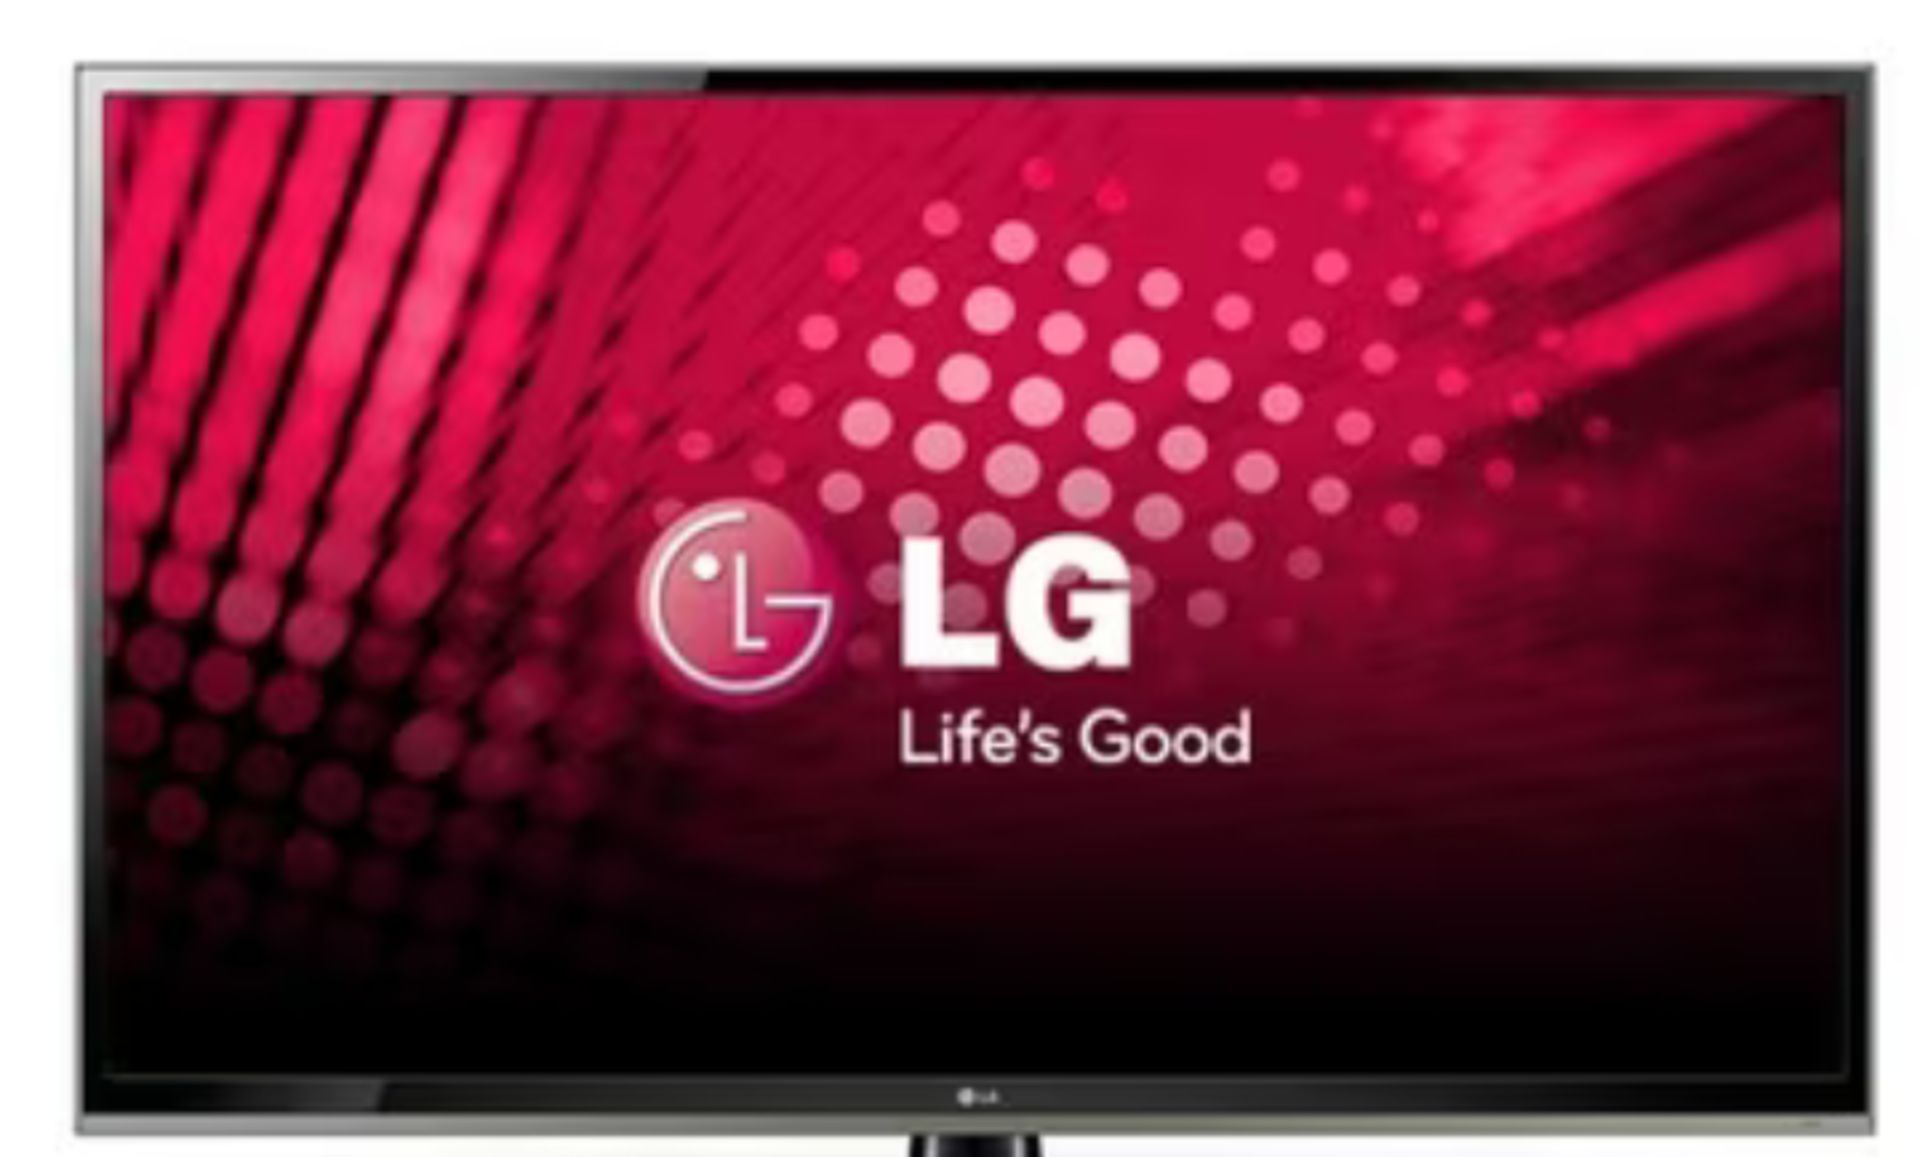 LG 42LS5600 42-INCH WIDESCREEN FULL HD 1080P LED TV WITH FREEVIEW AND DLNA - NO FEET